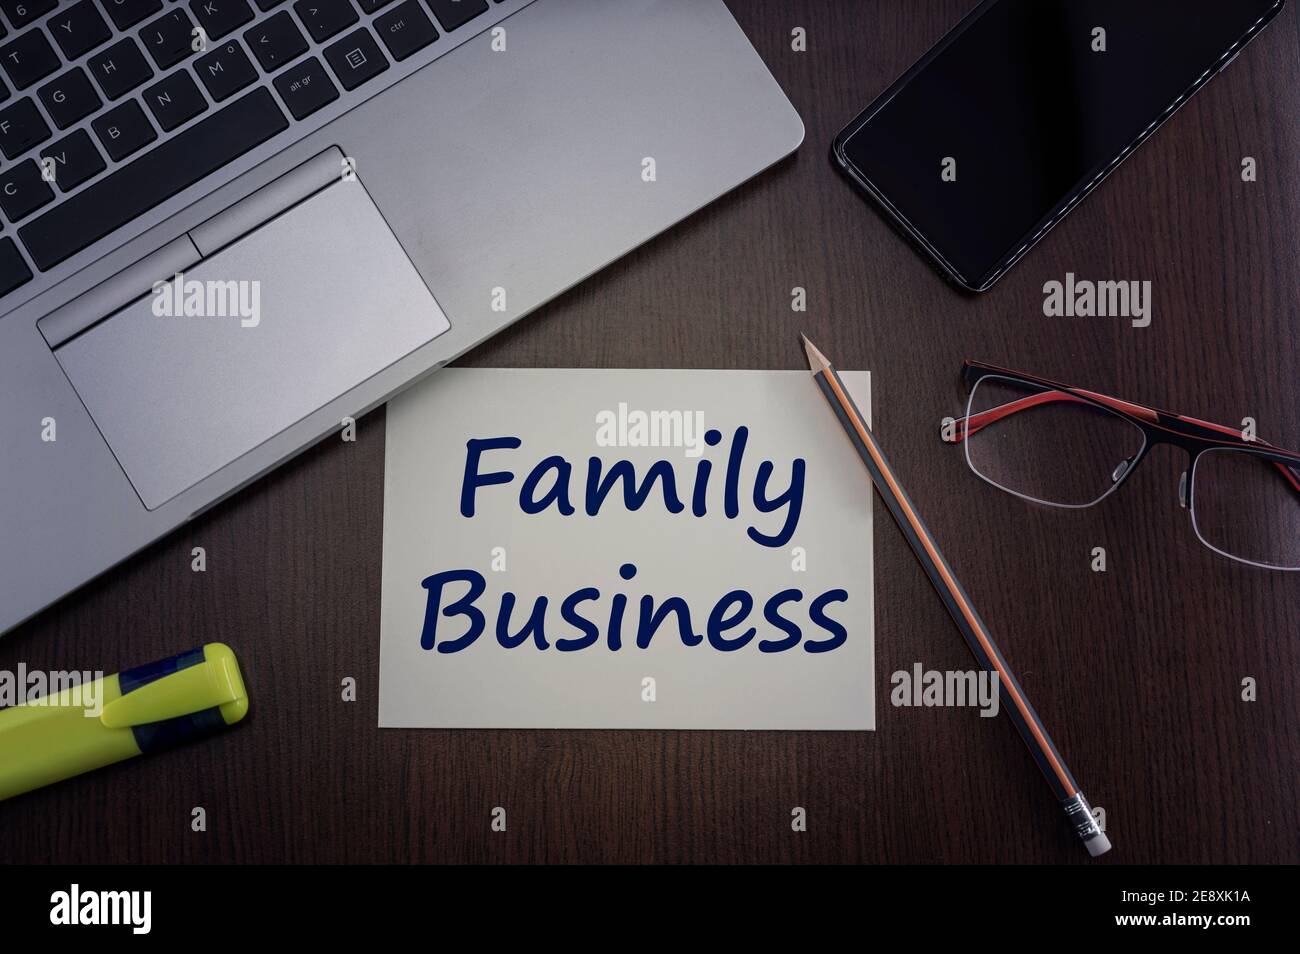 Top view of laptop, phone, glasses and pencil with card with inscription family business. Stock Photo